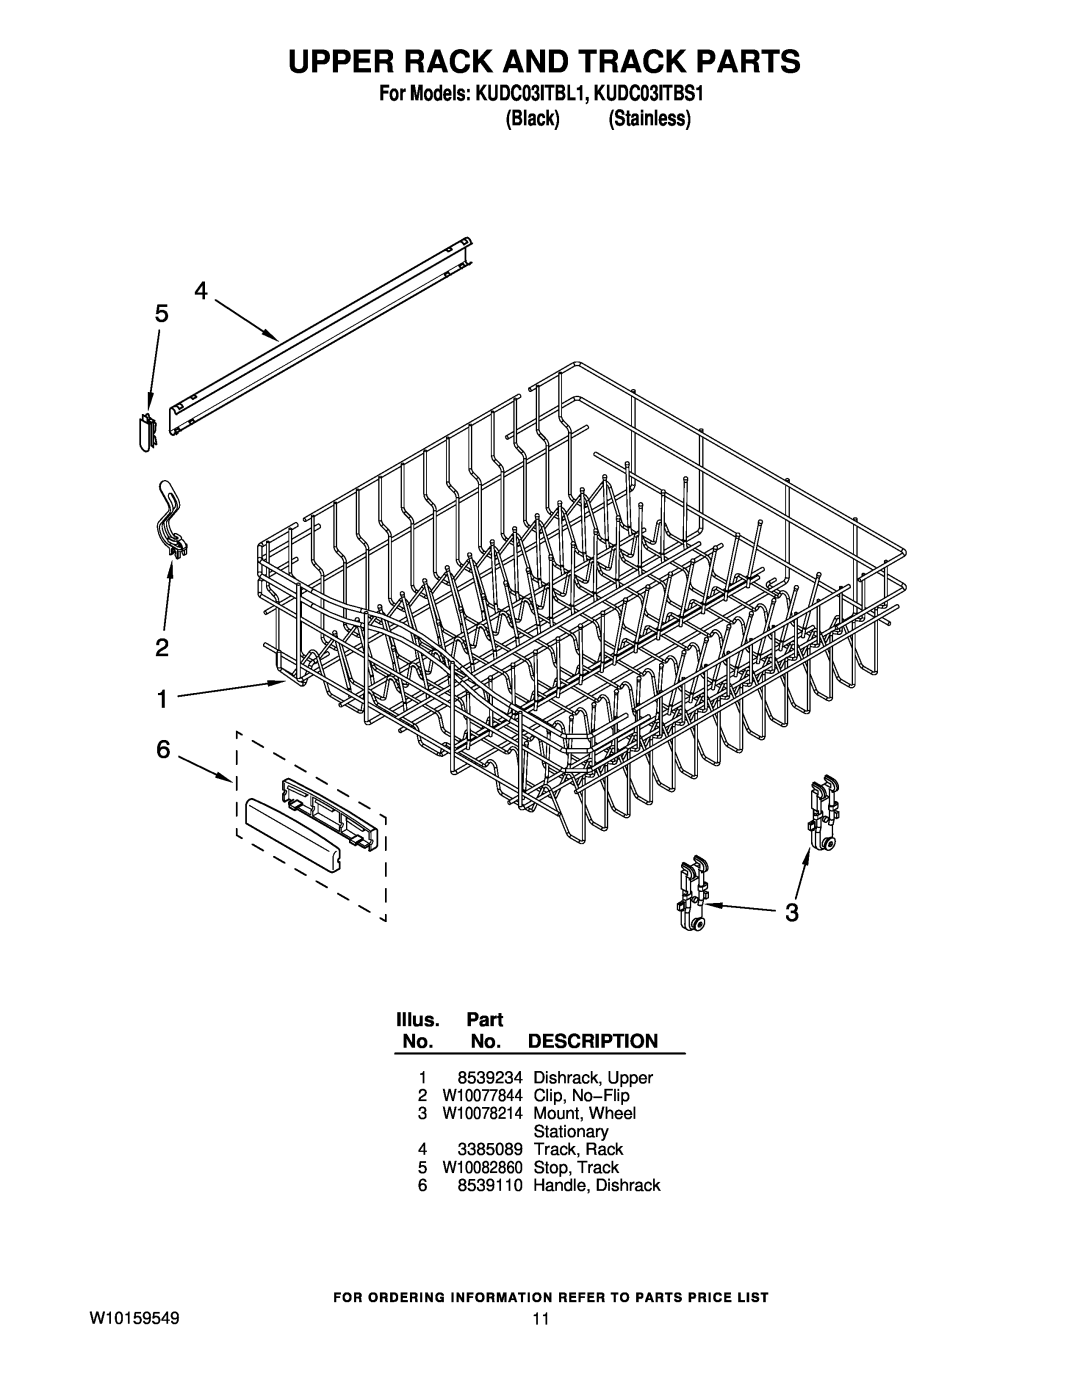 KitchenAid manual Upper Rack And Track Parts, For Models KUDC03ITBL1, KUDC03ITBS1 Black Stainless 